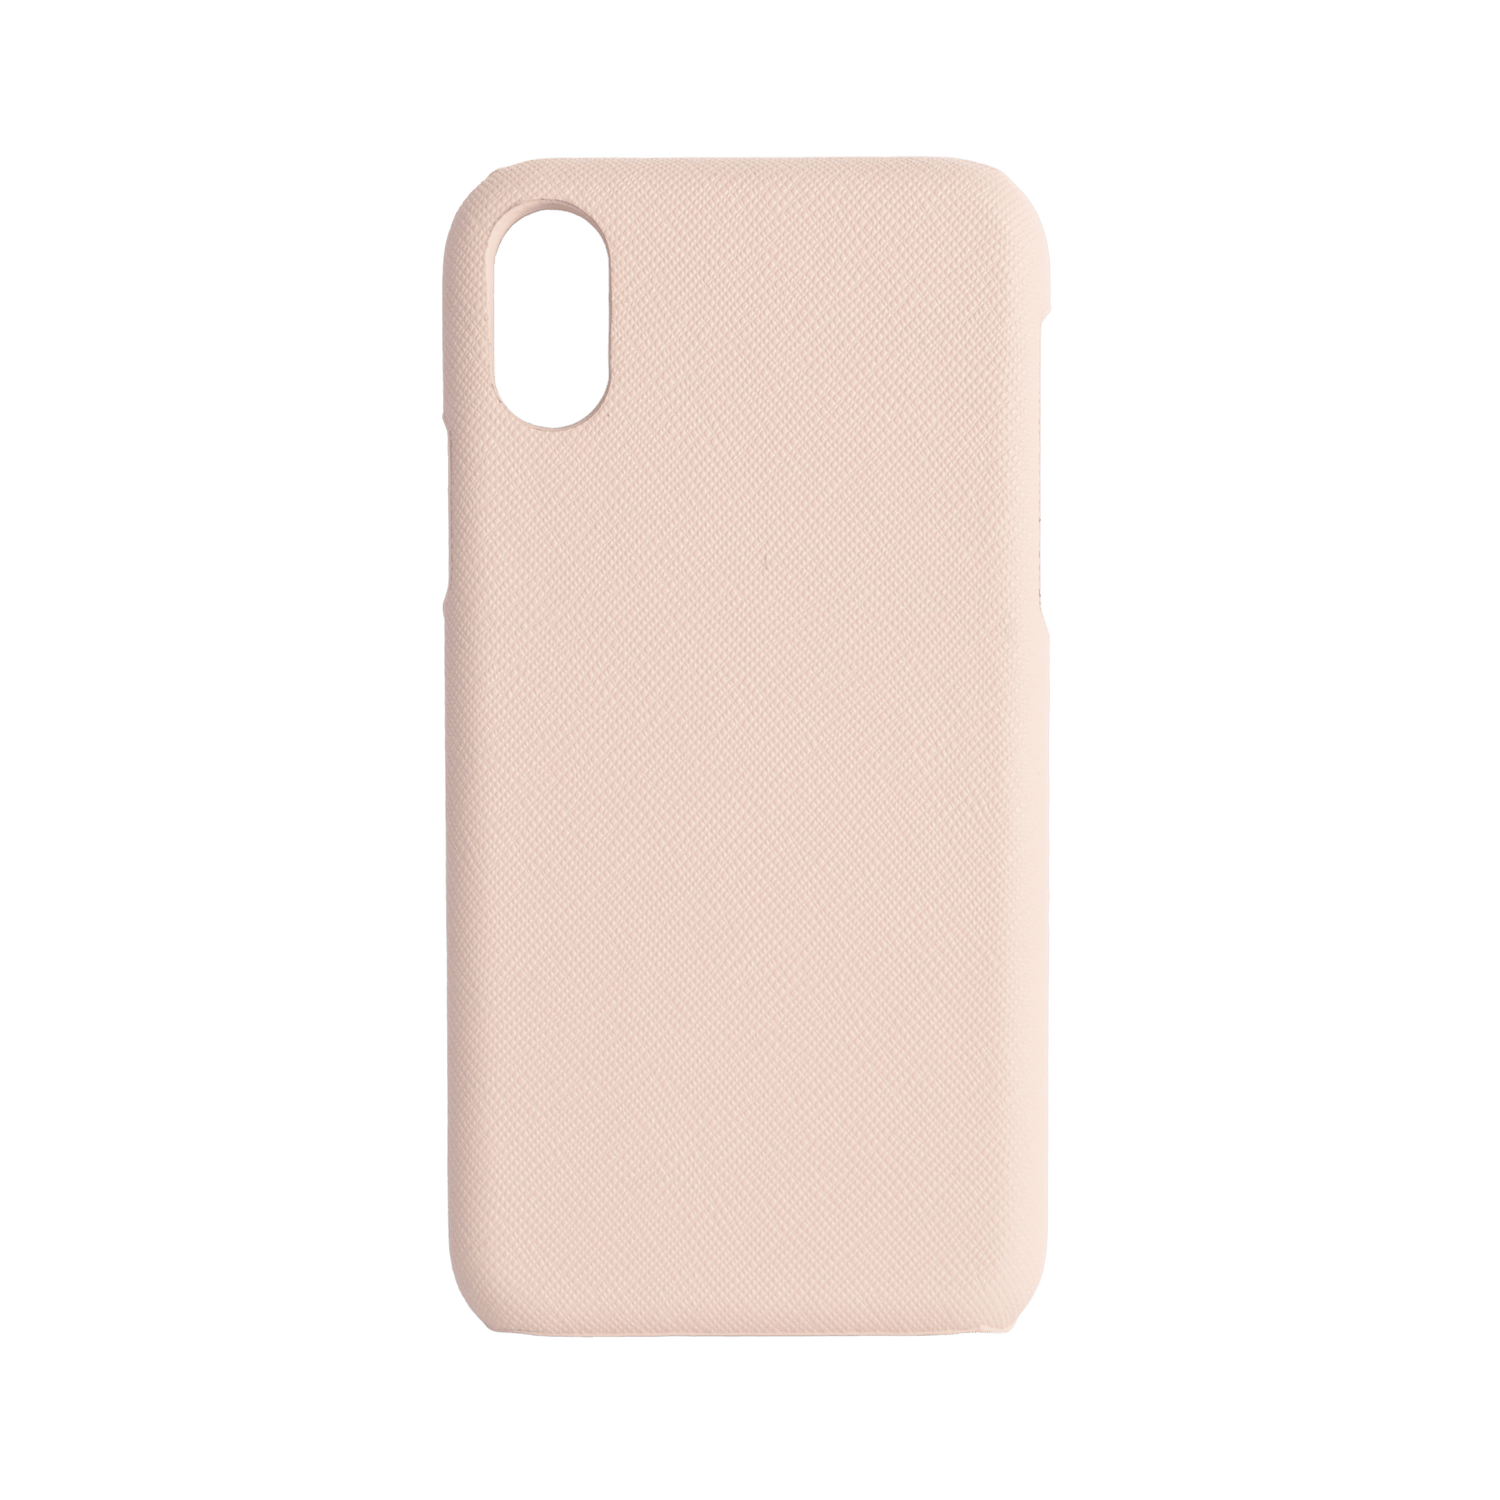 iPhone X/XS Max Case Pink - Personal Press